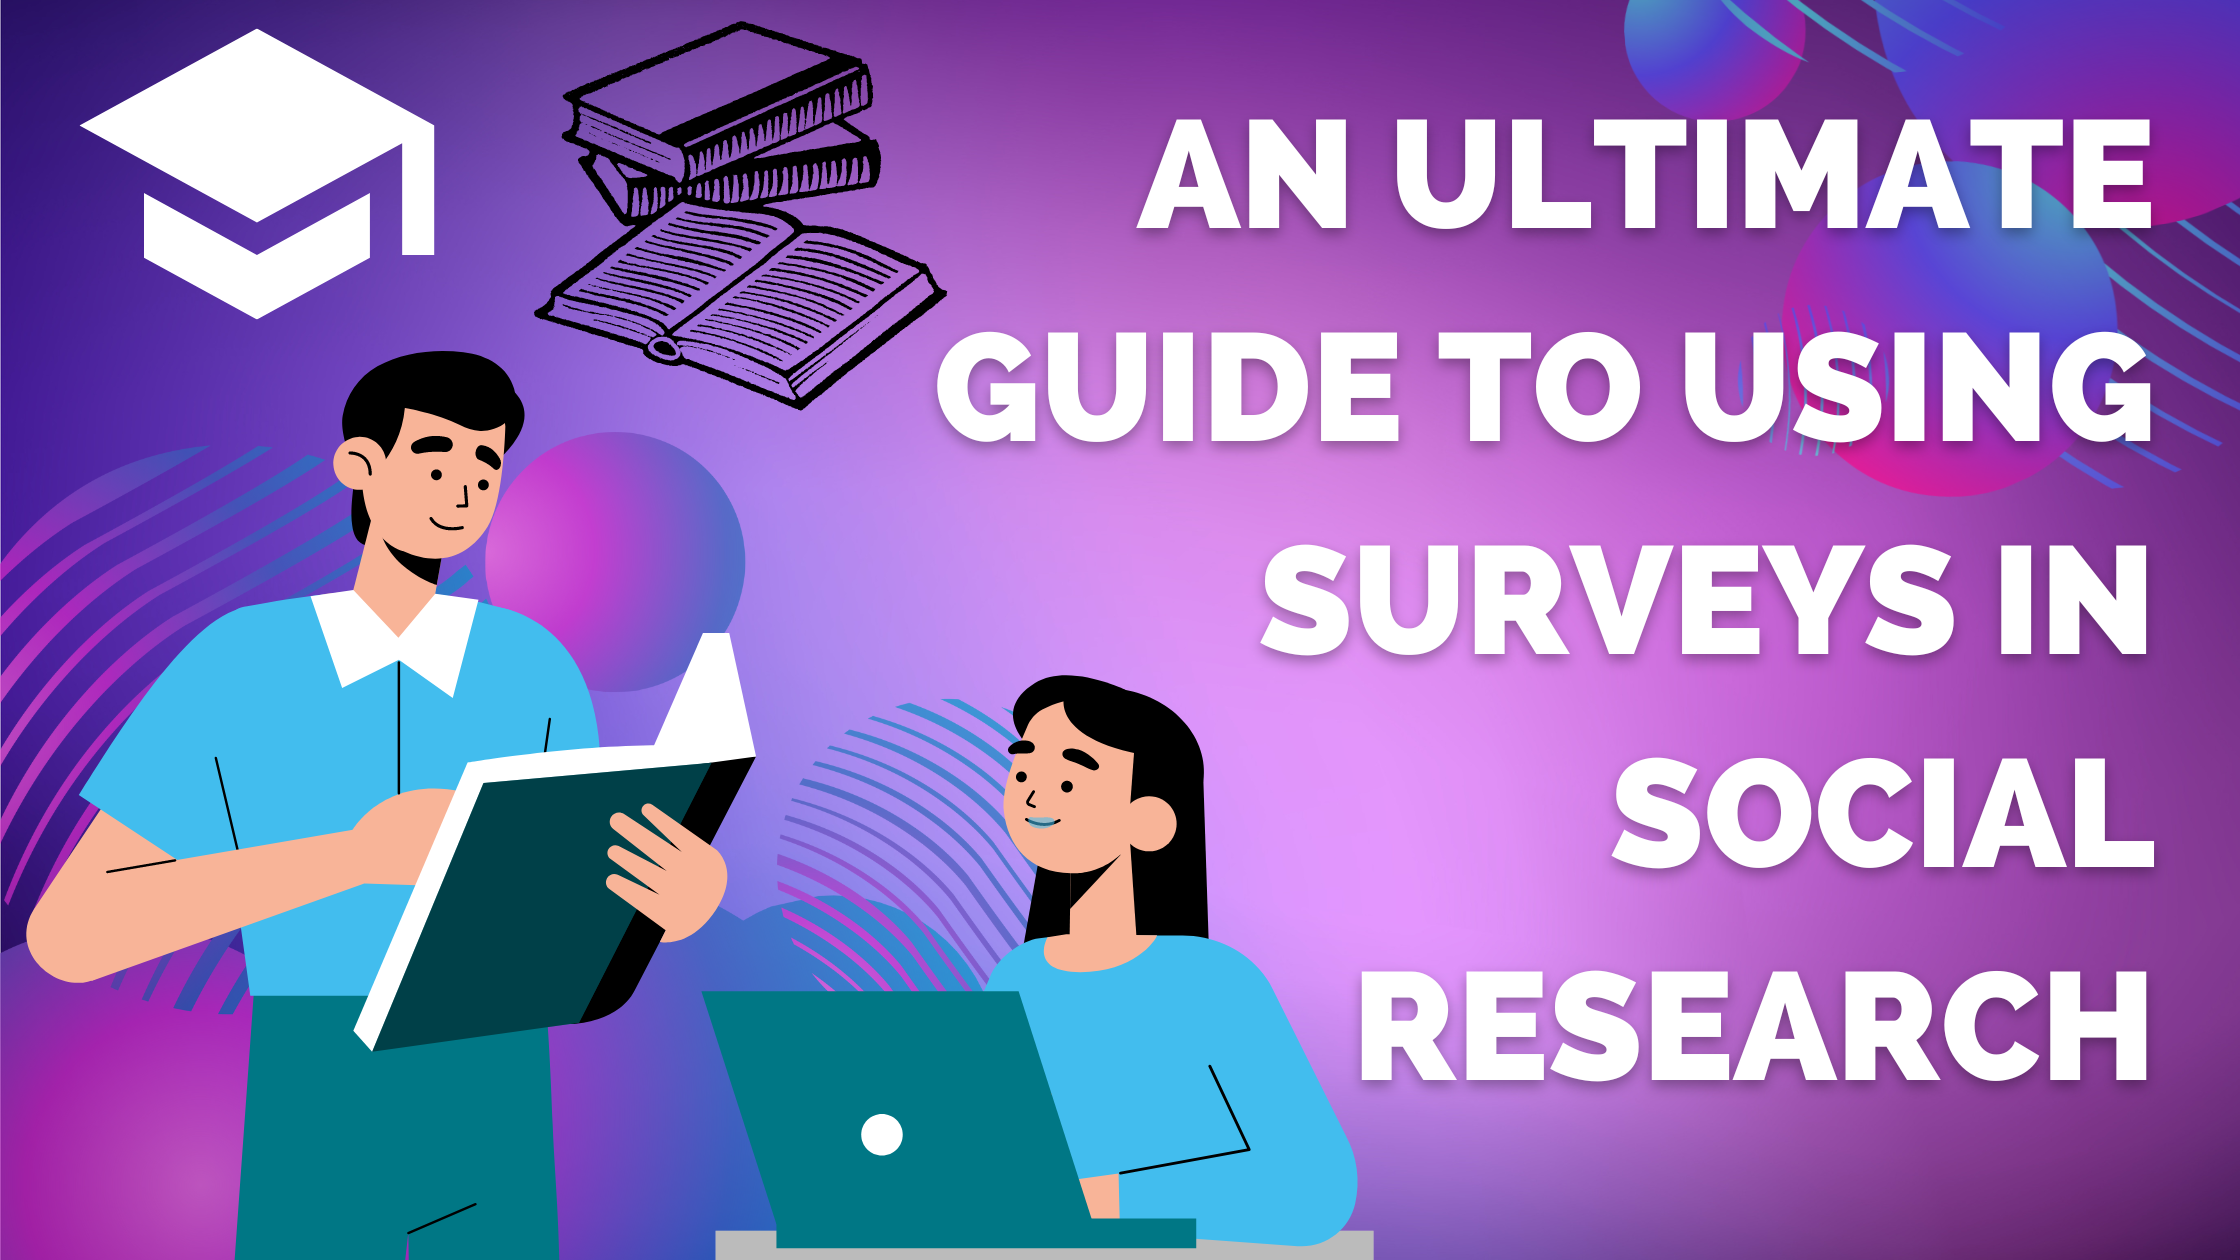 An Ultimate Guide to Using Surveys in Social Research